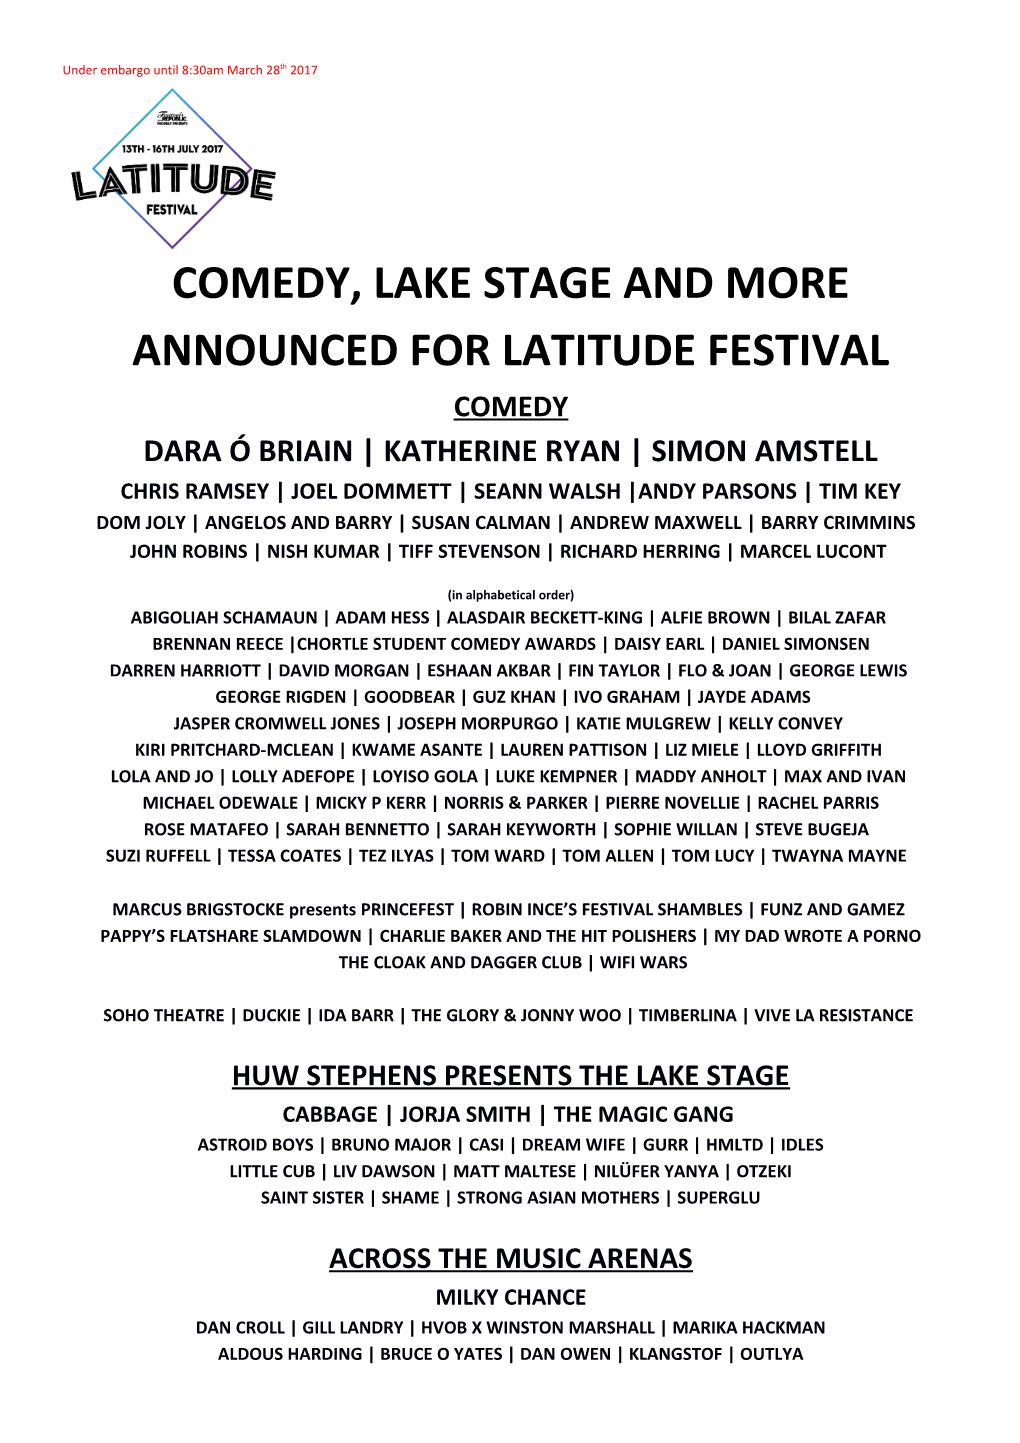 Comedy, Lake Stage and More Announced for Latitude Festival